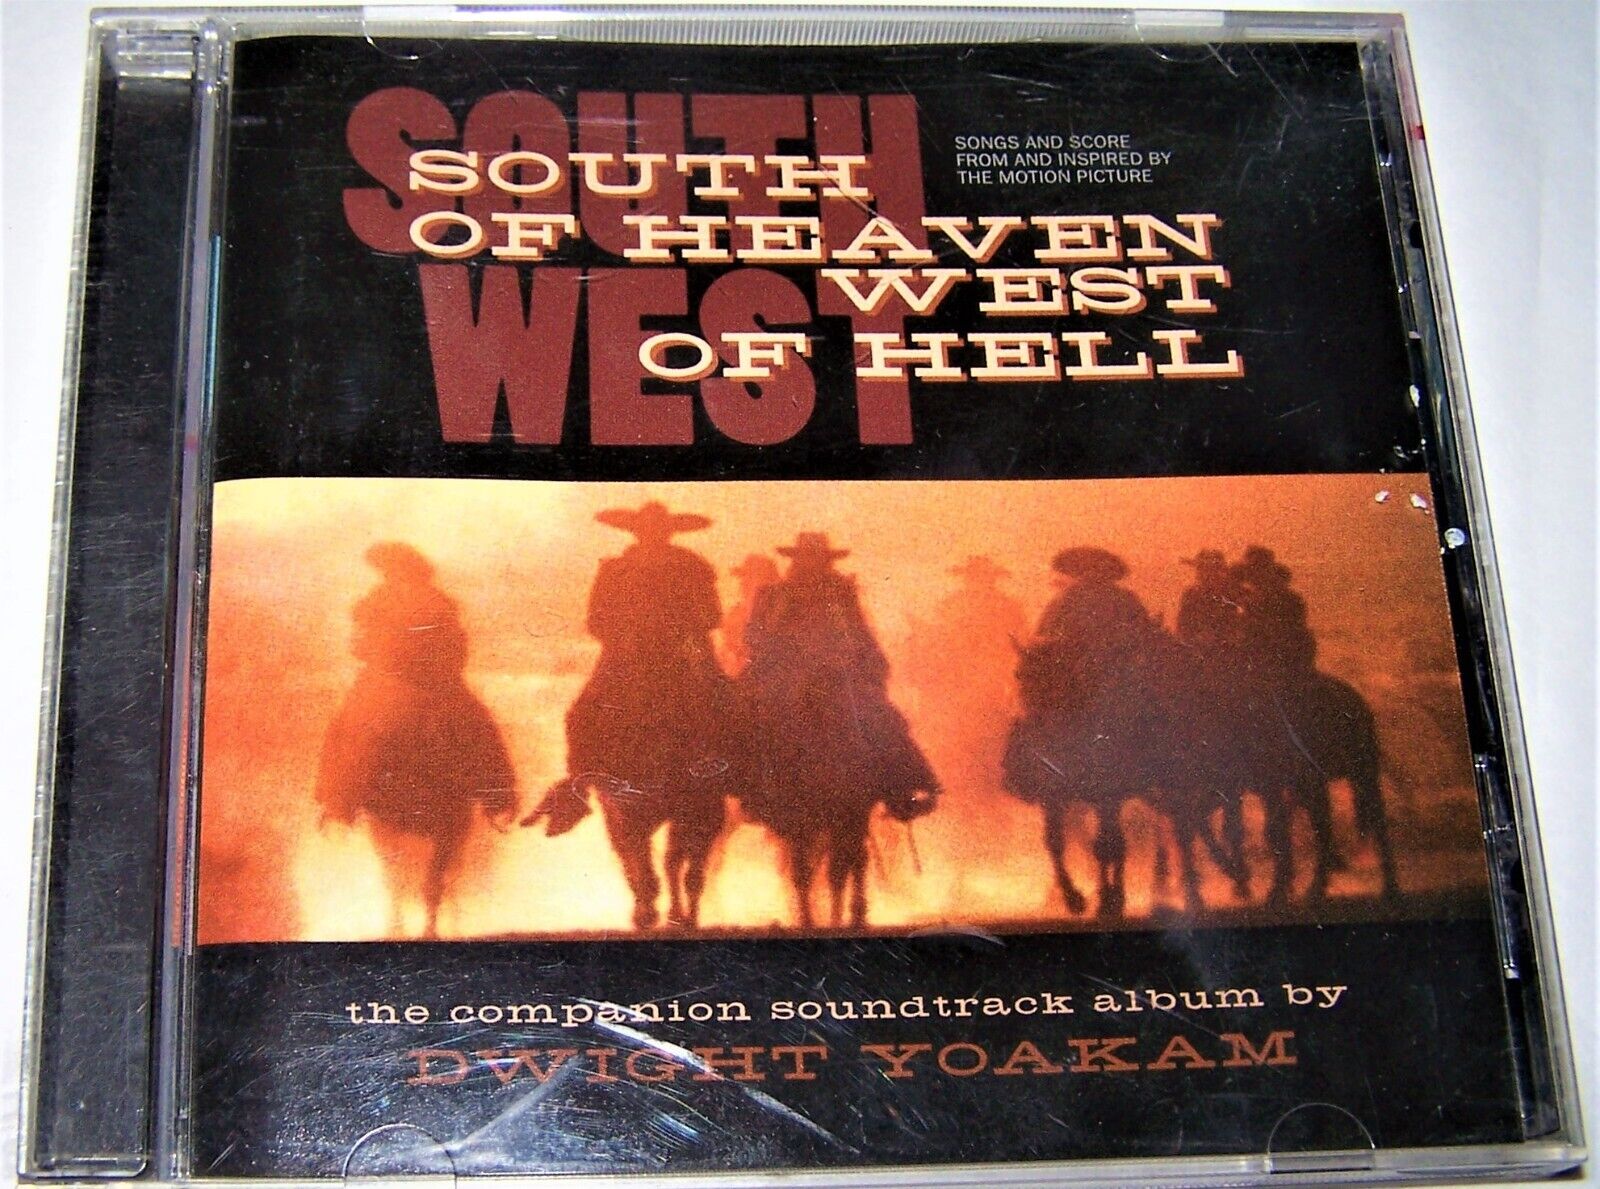 YOAKAM DWIGHT: SOUTH OF HEAVEN WEST OF HELL - O.S.T. [CD]